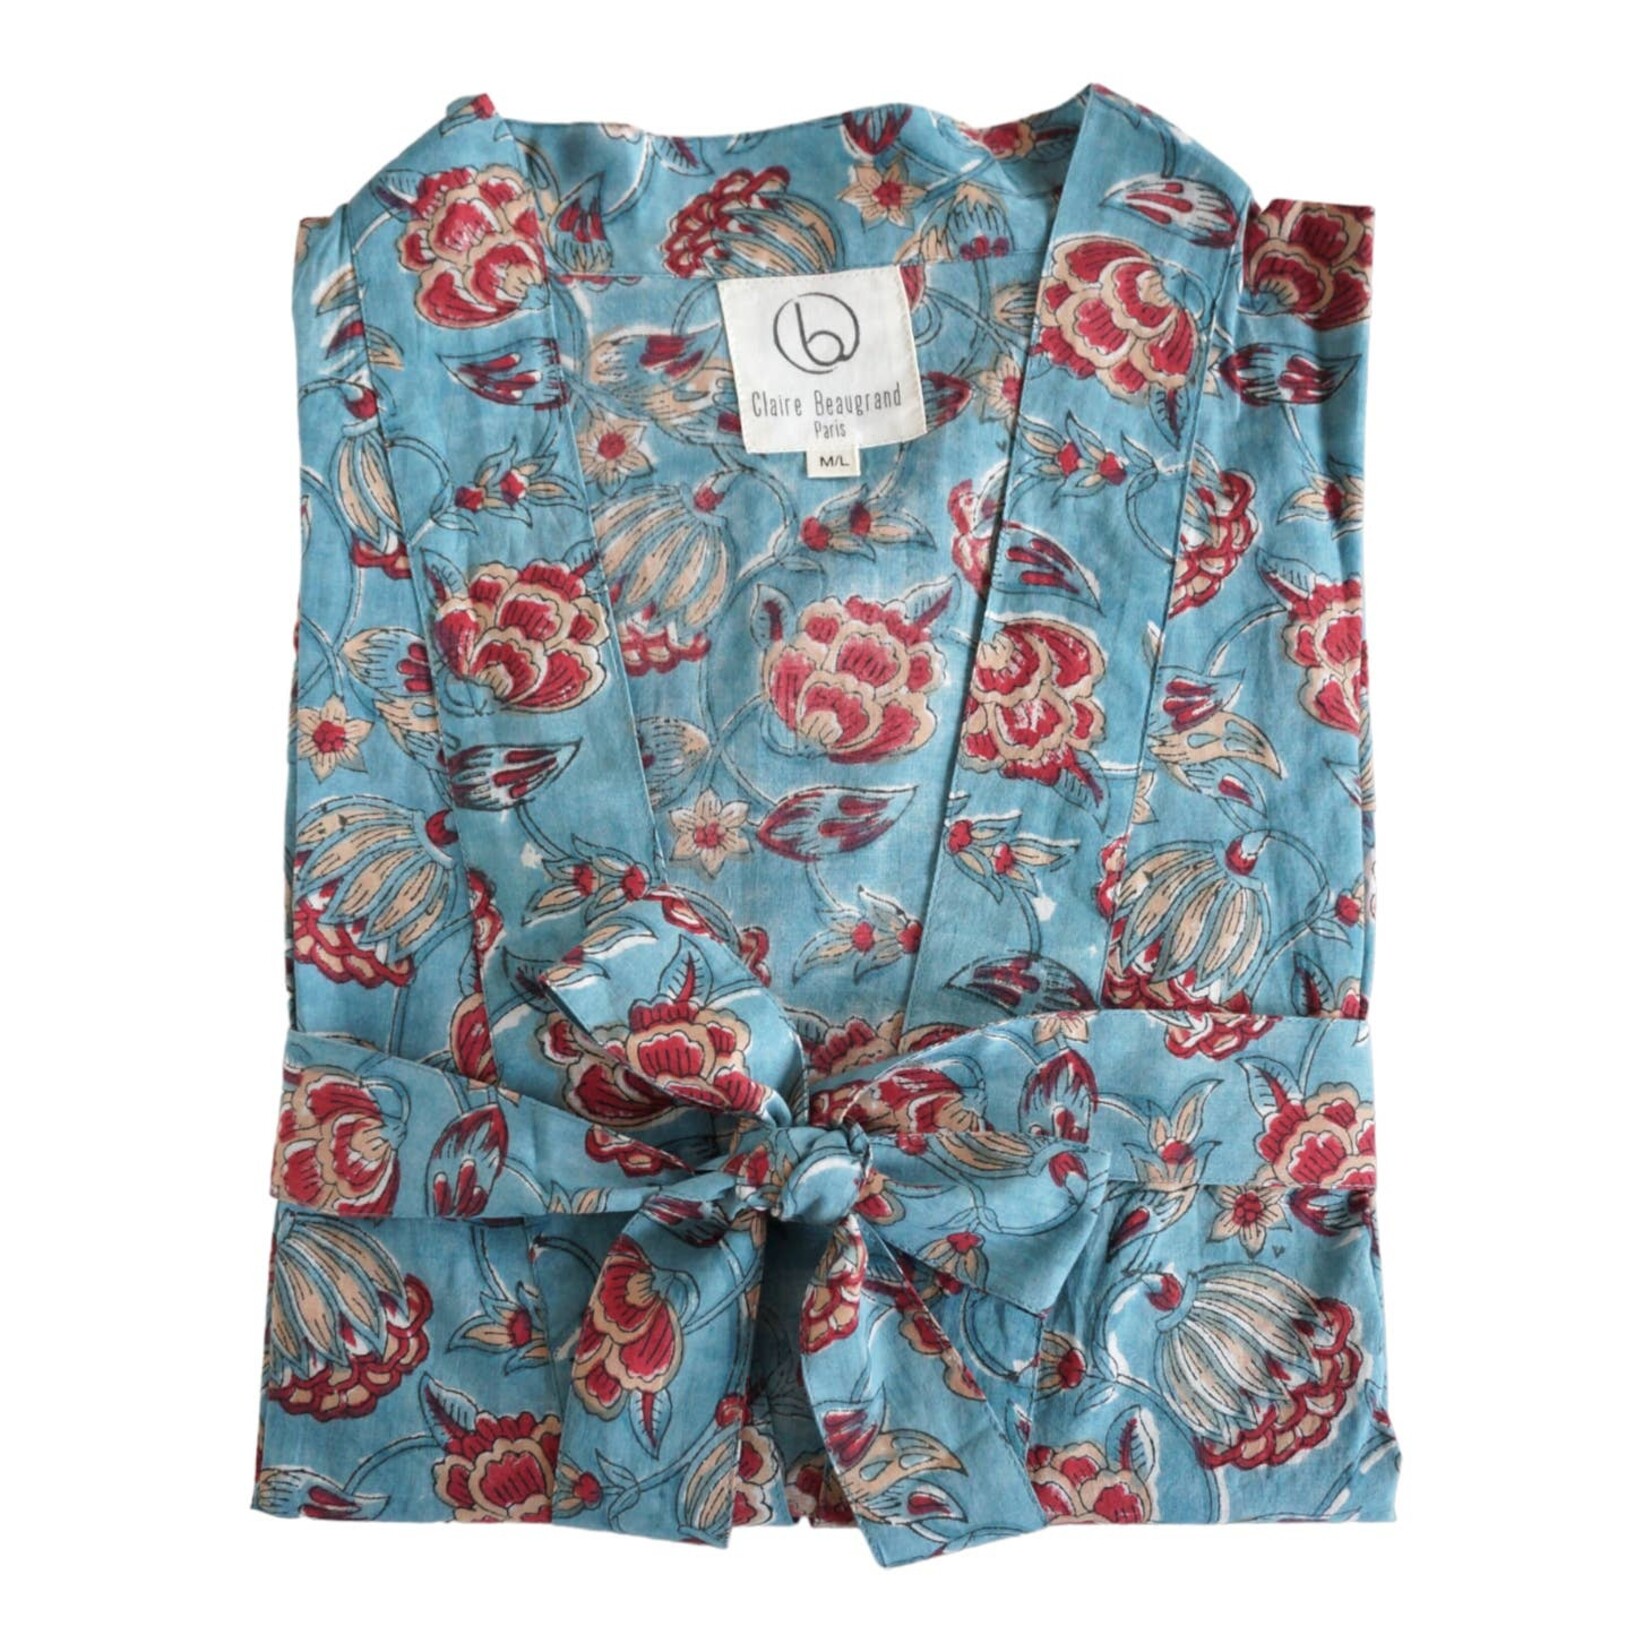 Claire Beaugrand Floral Printed Kimonos